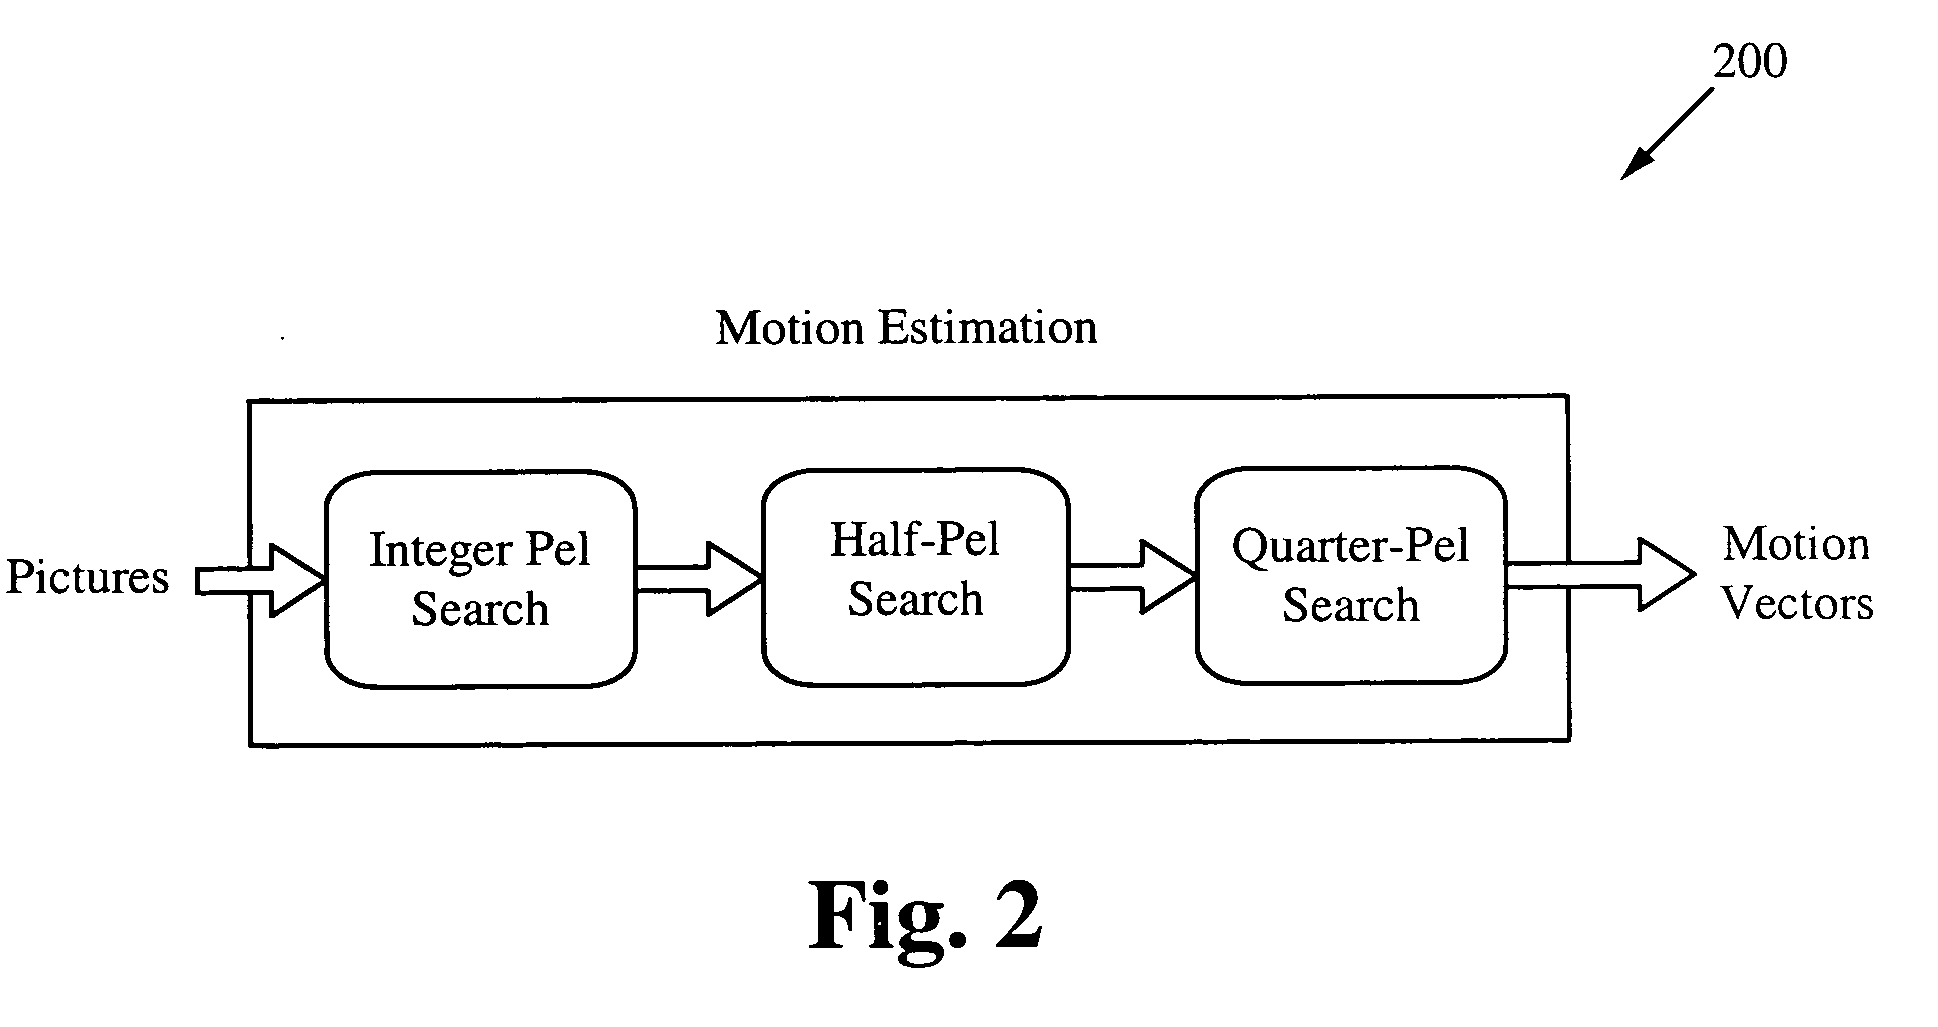 Speculative start point selection for motion estimation iterative search